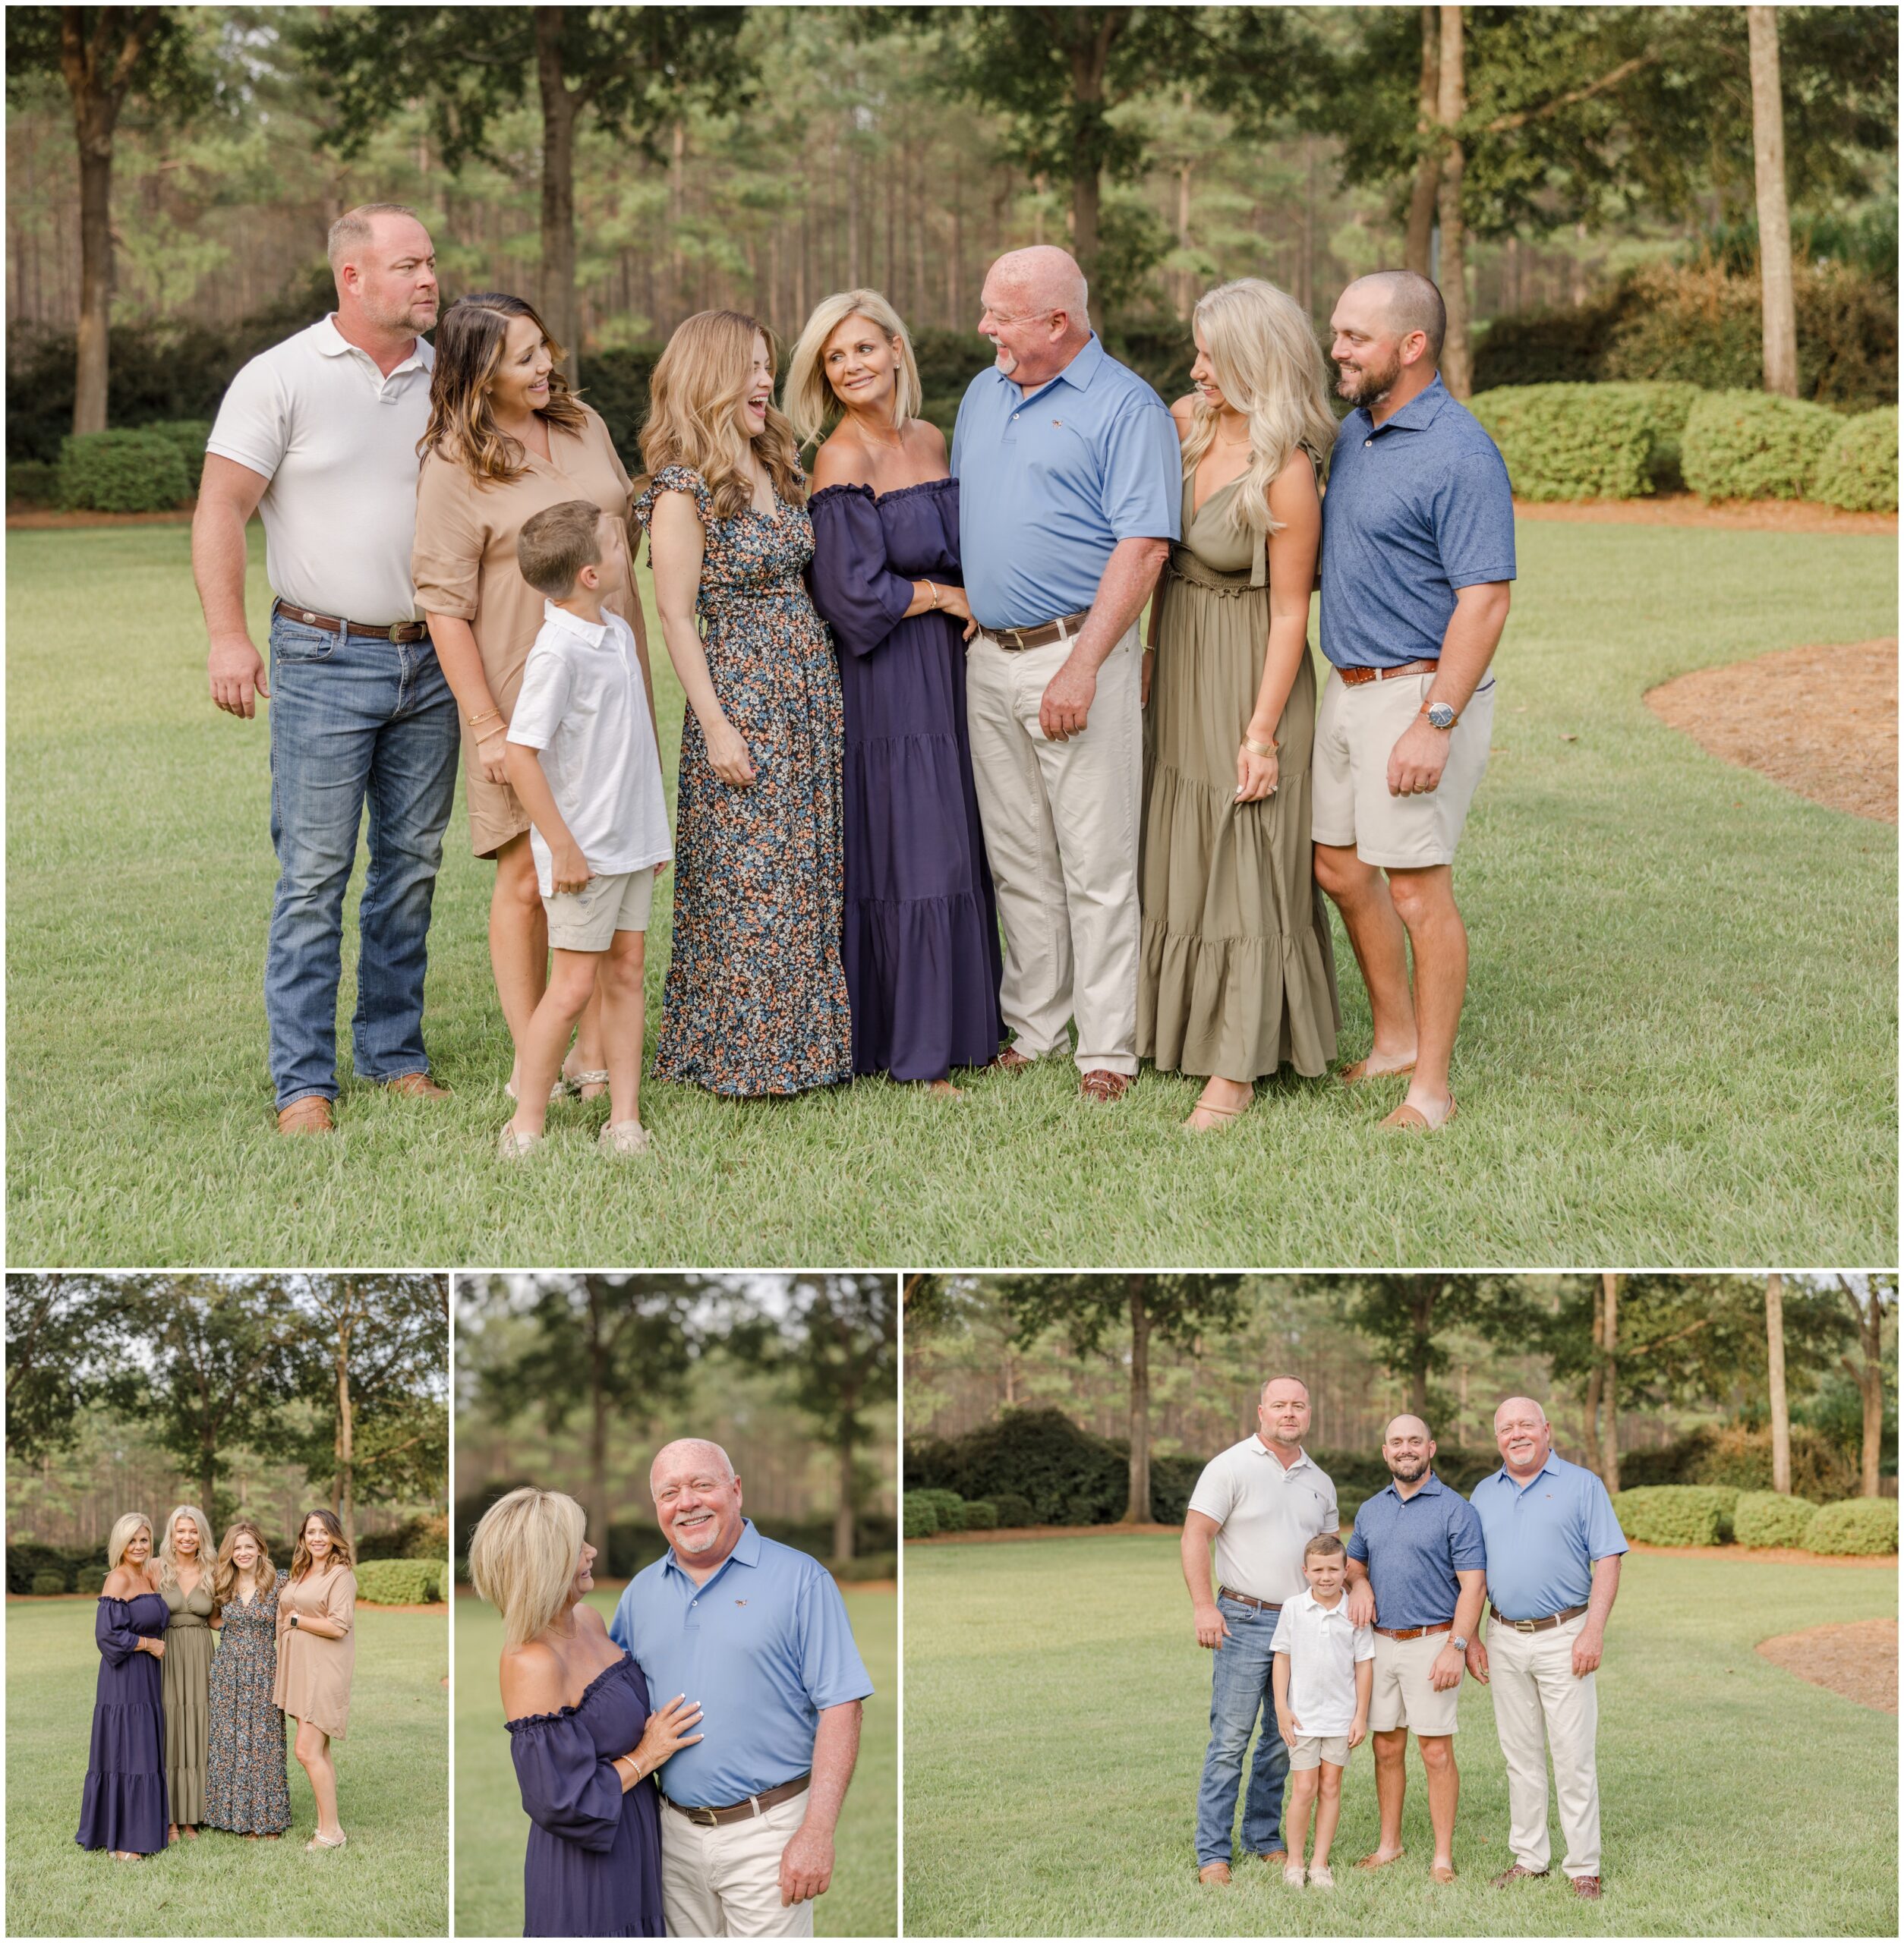 Family portrait of grandparents with their children and grandchild from a Greenville family photography session.